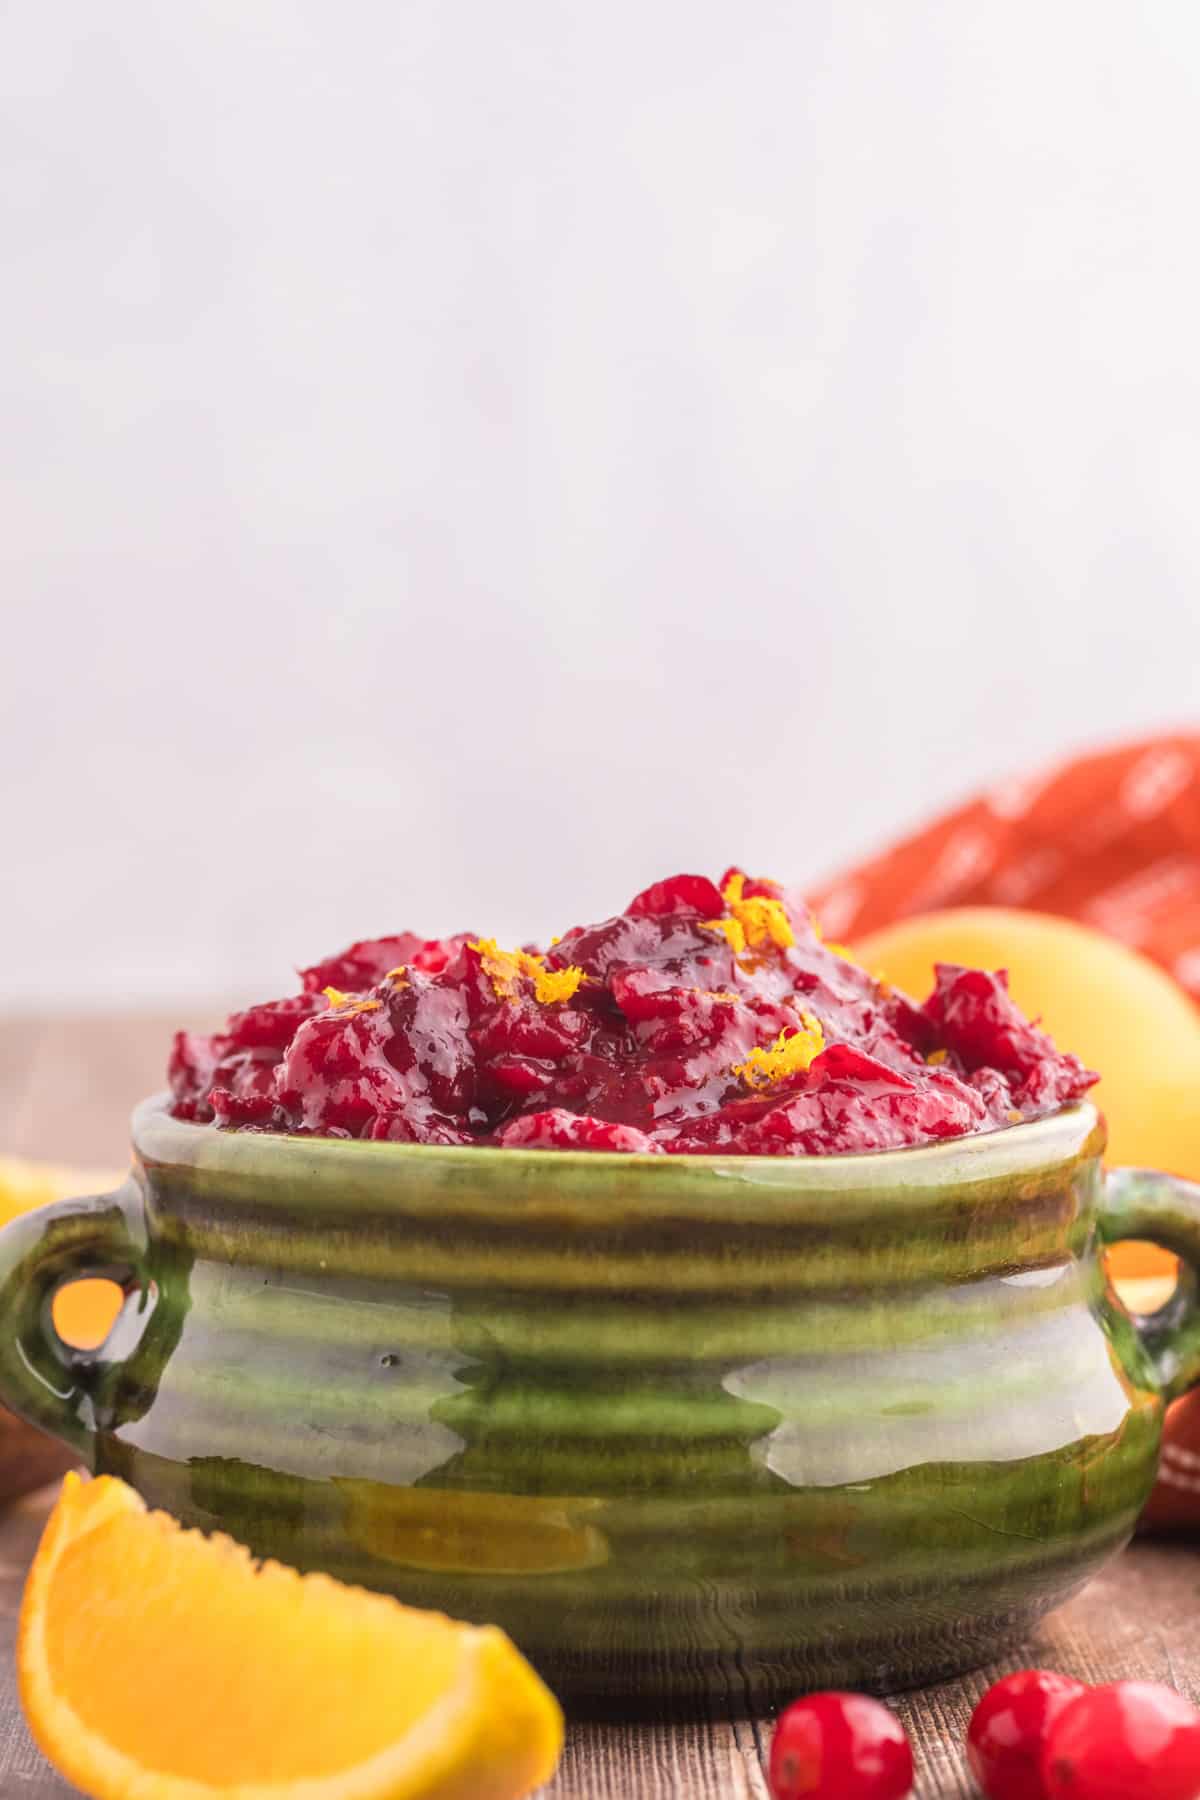 The green bowl holds a flavorful cranberry sauce.